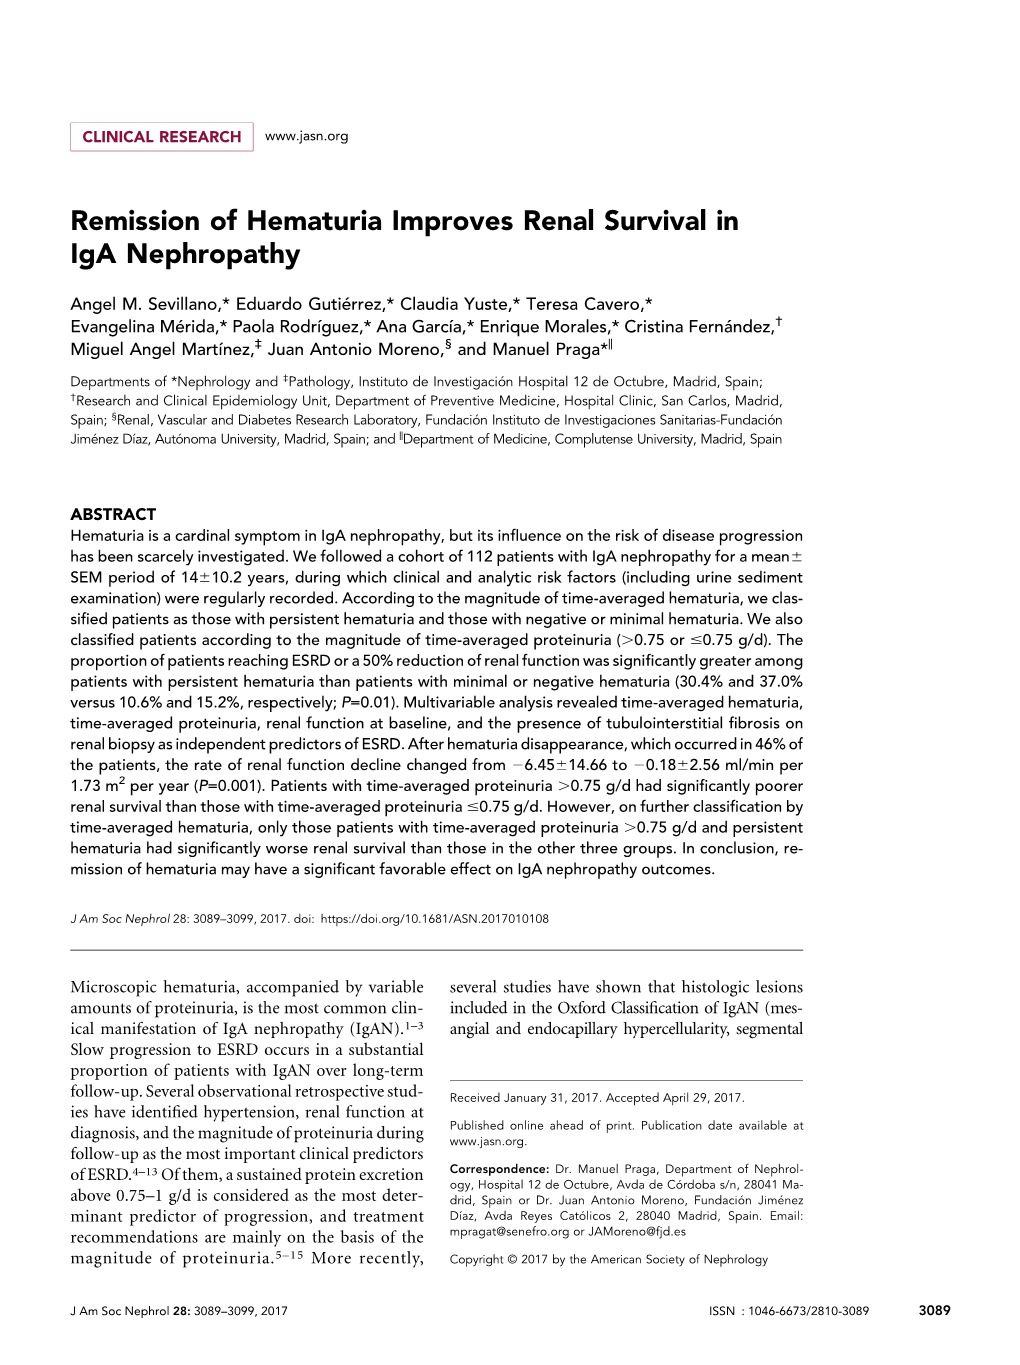 Remission of Hematuria Improves Renal Survival in Iga Nephropathy